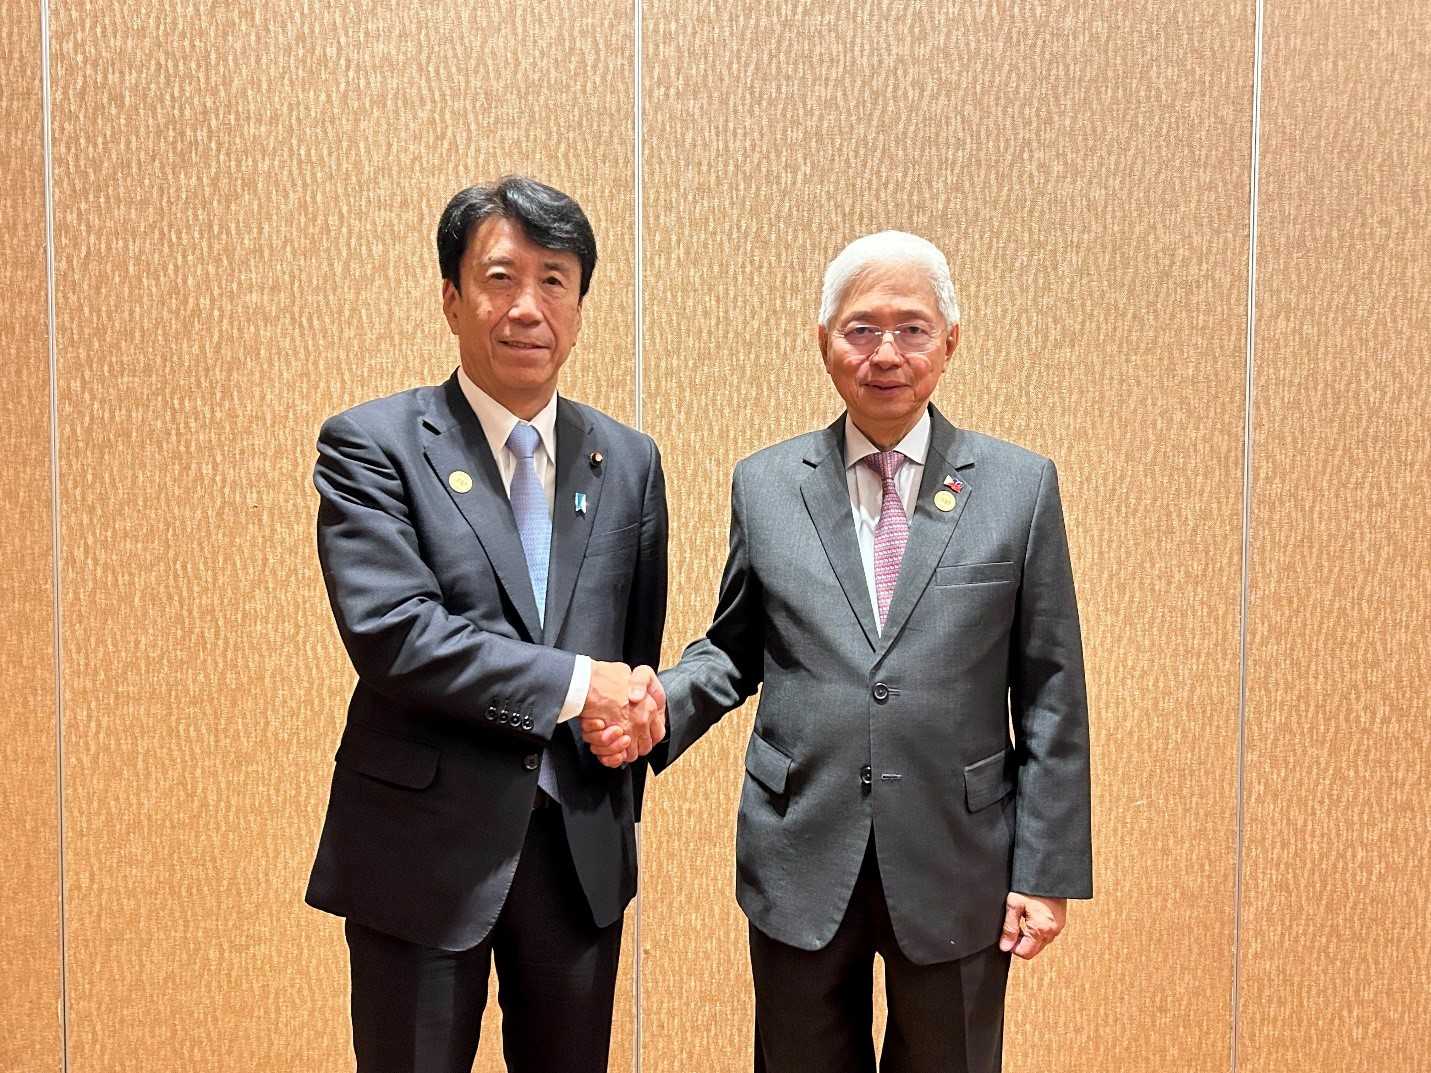 PH, Japan to explore cooperation in clean energy, trade and investment - DTI